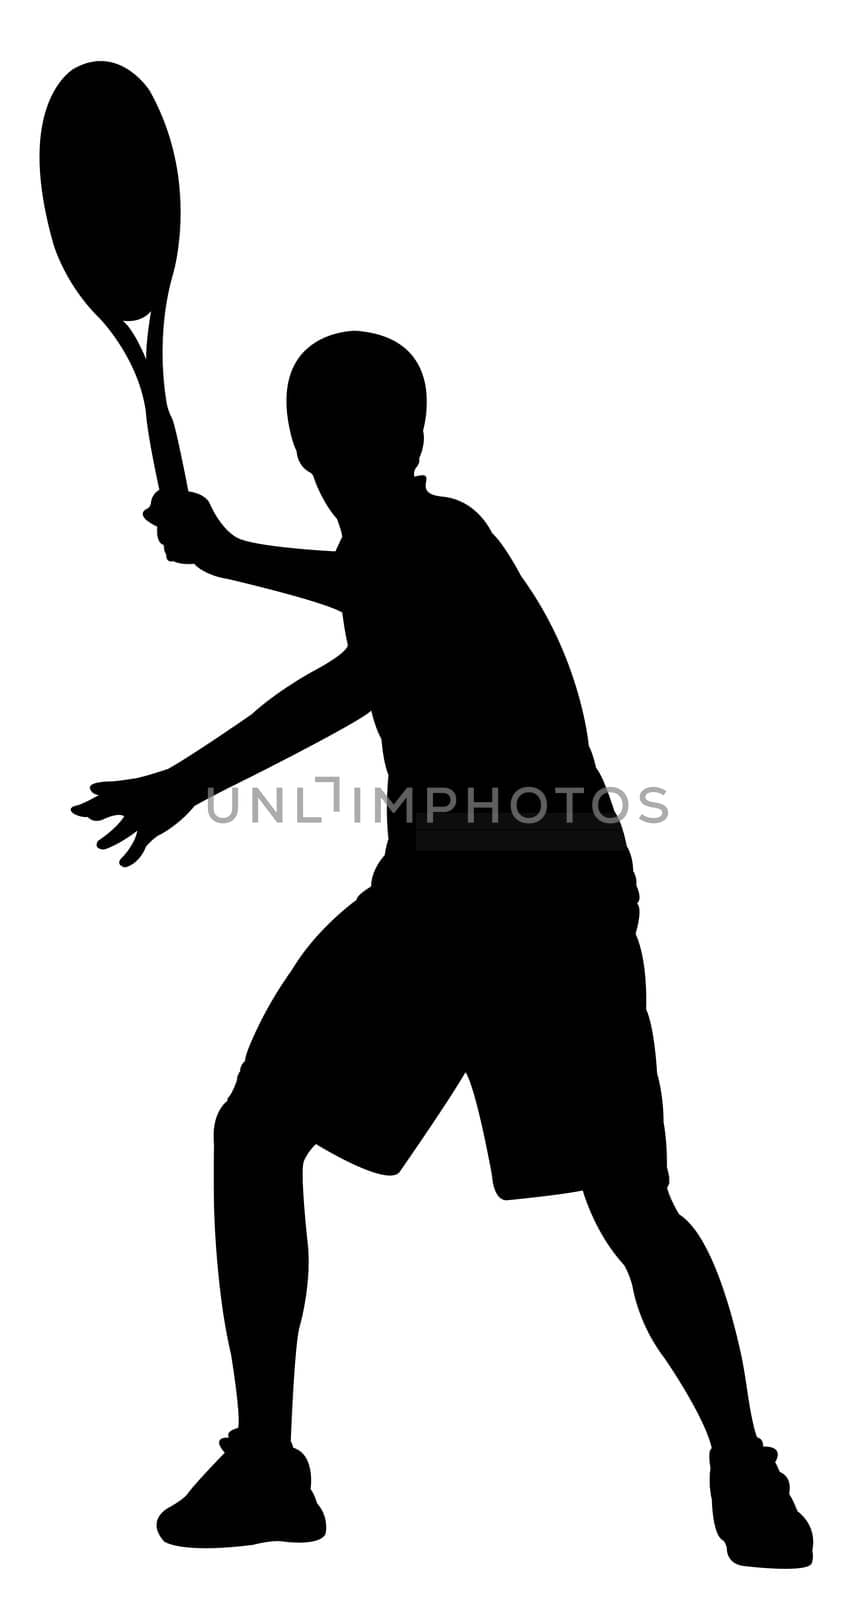 tennis player boy silhouette vector by Dr.G